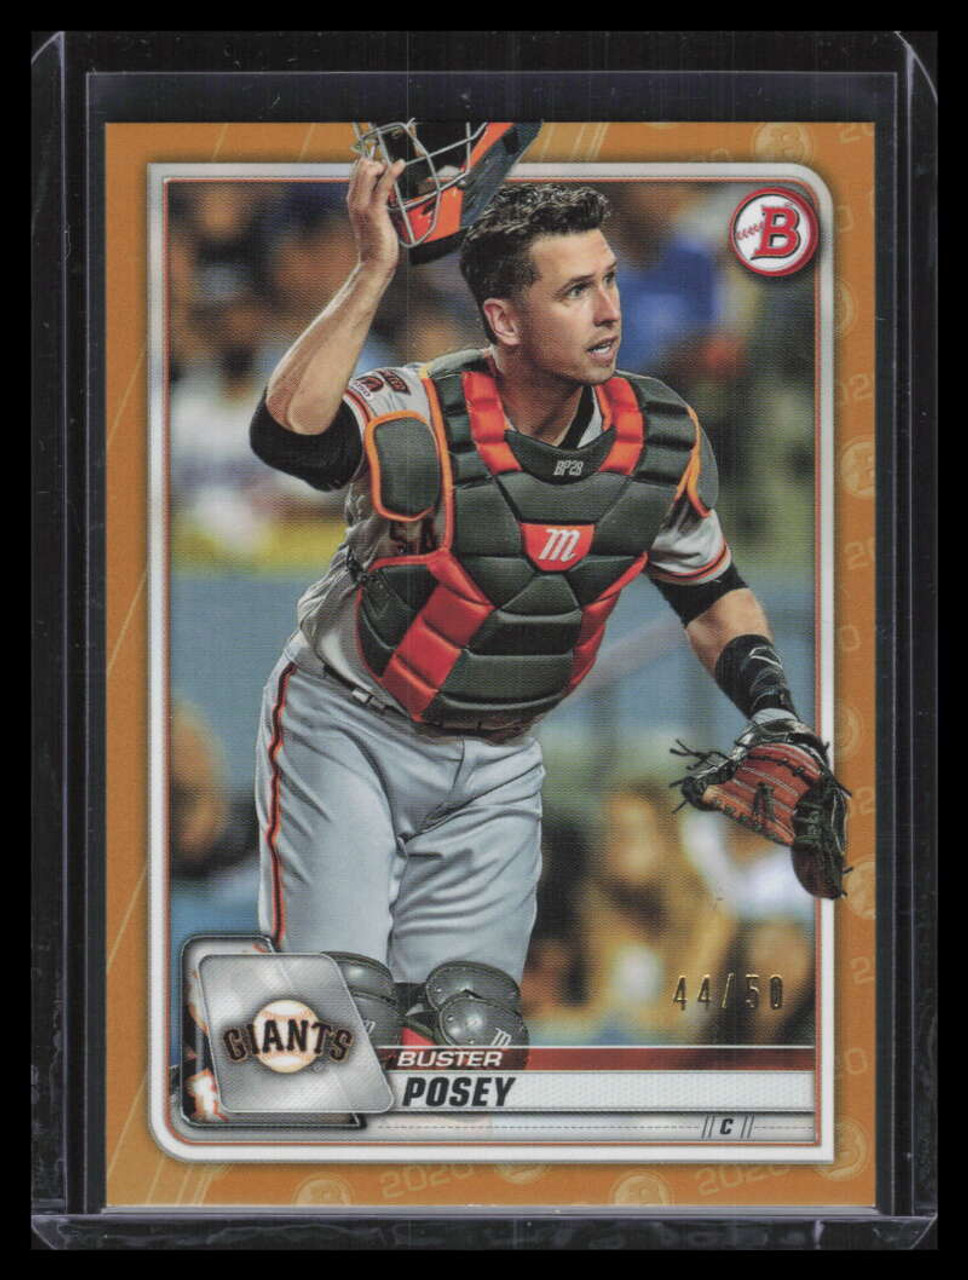 2020 Bowman Gold 86 Buster Posey 44/50